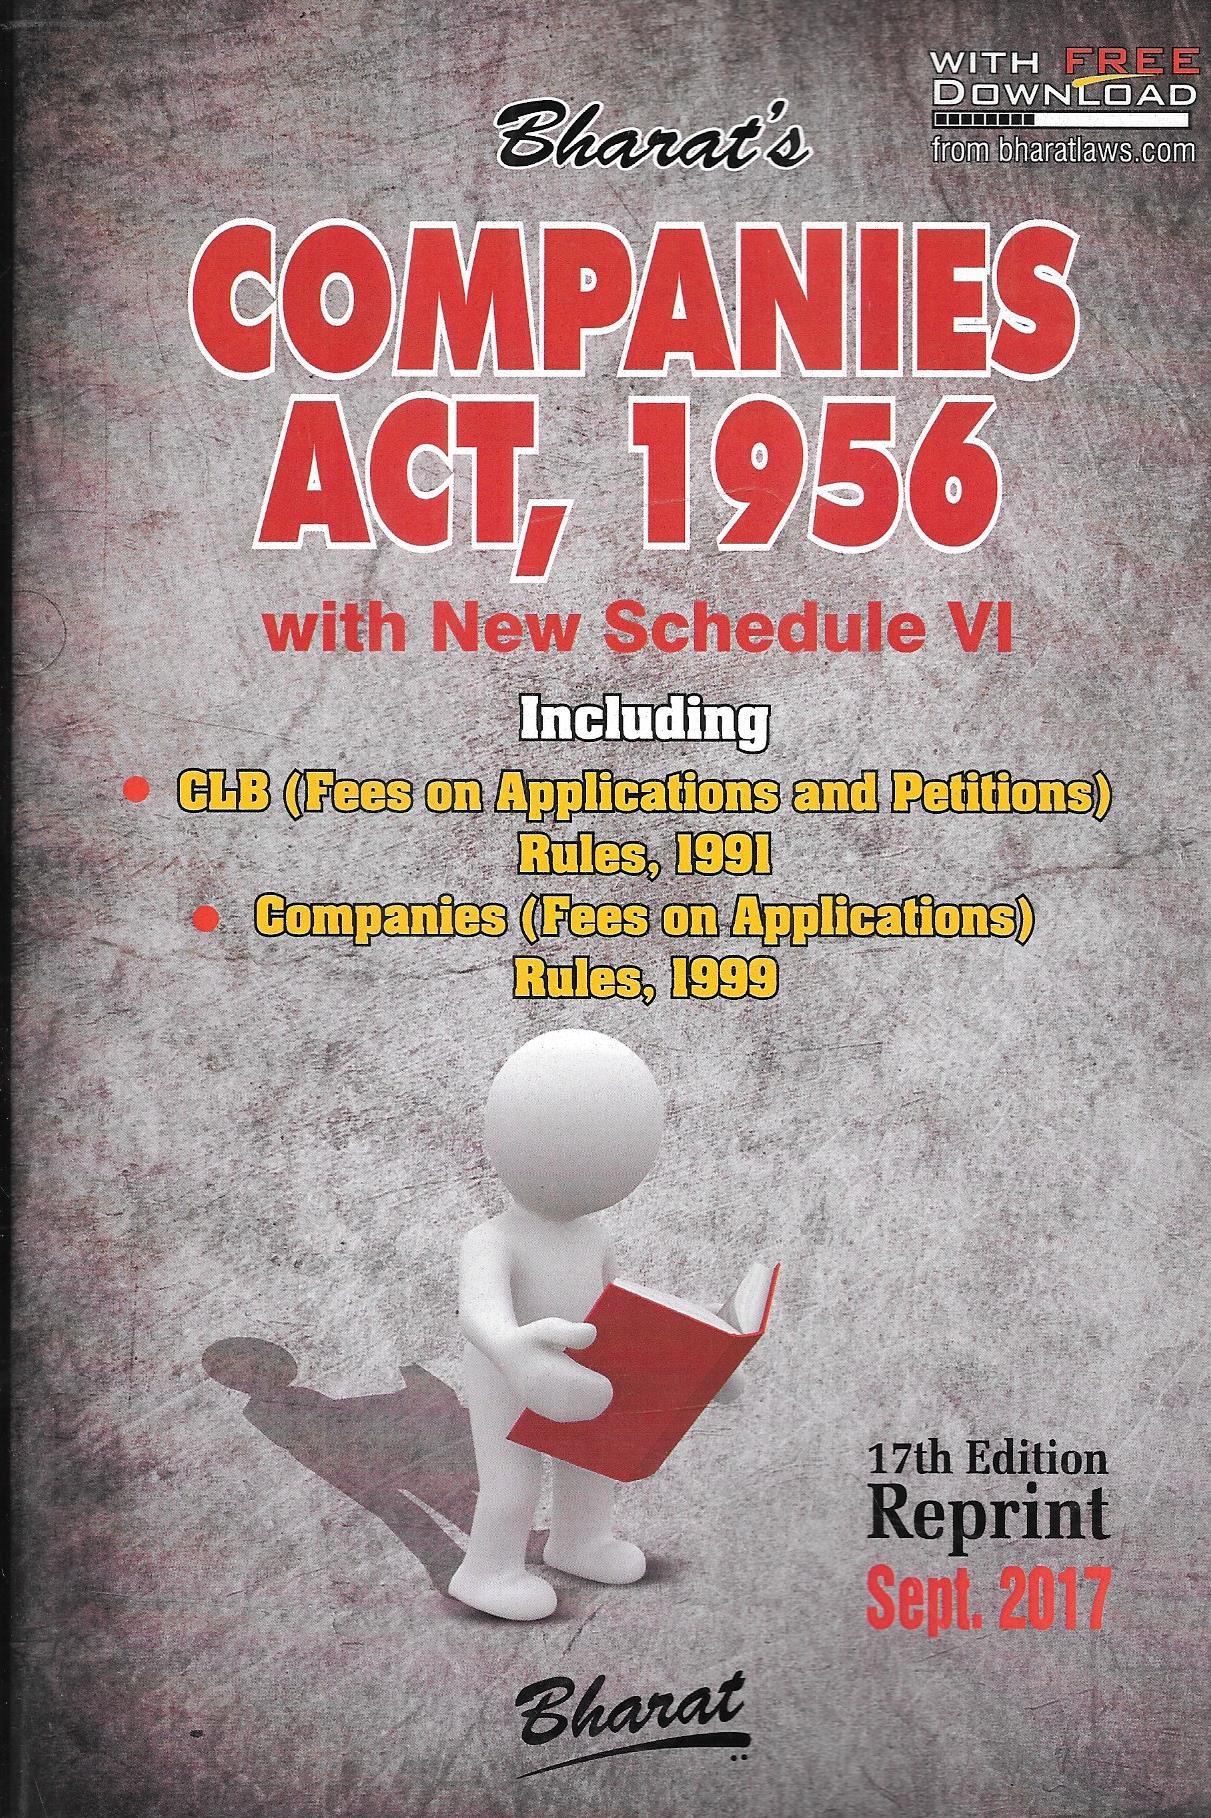 Companies Act, 1956 With NEW Schedule VI - M&J Services